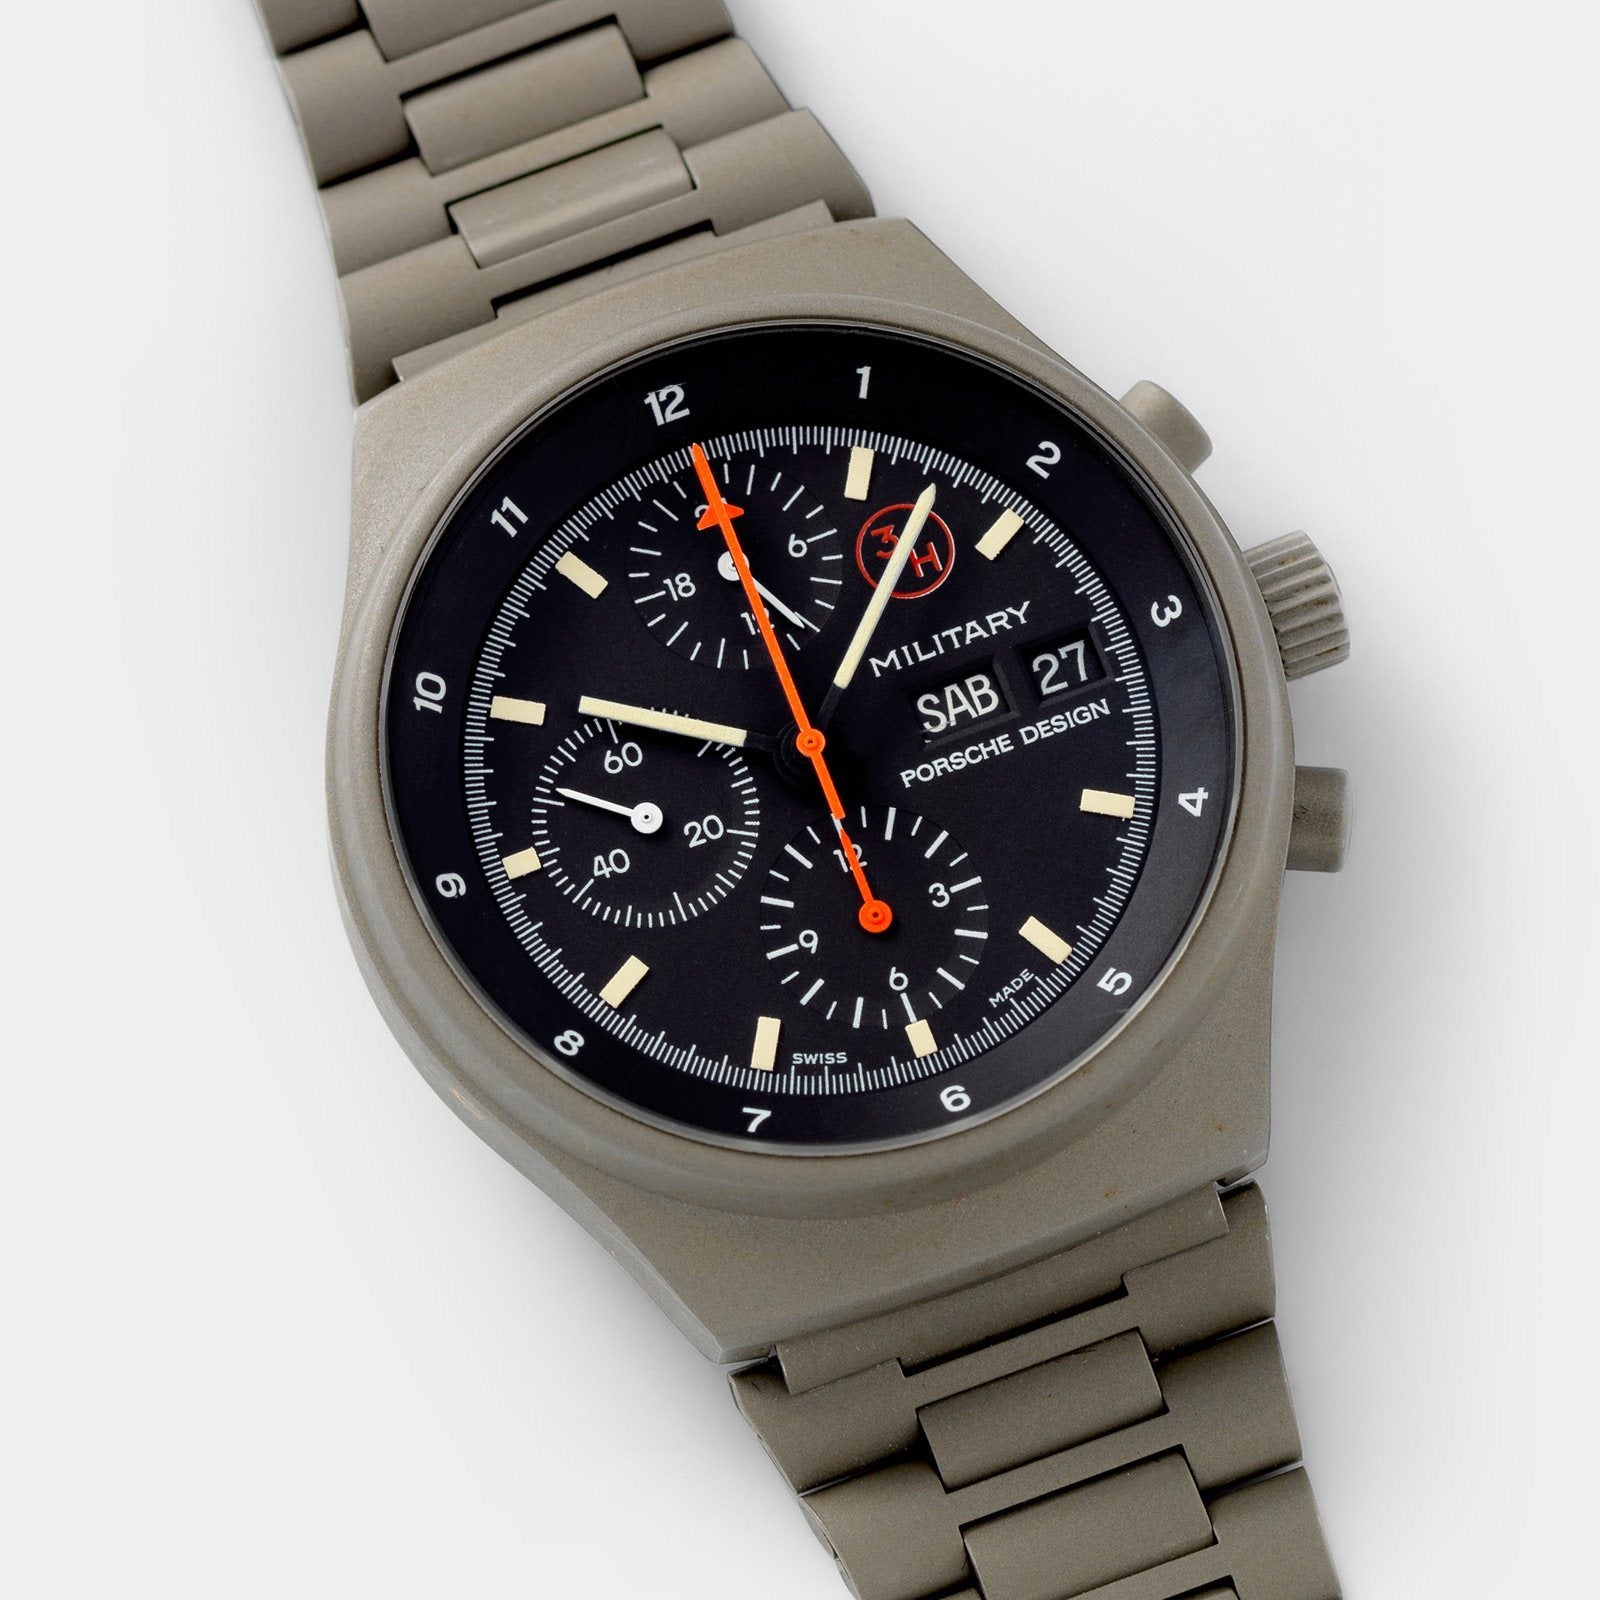 Porsche Design by Orfina 'Military' Chronograph Reference 7177 with green PVD coating